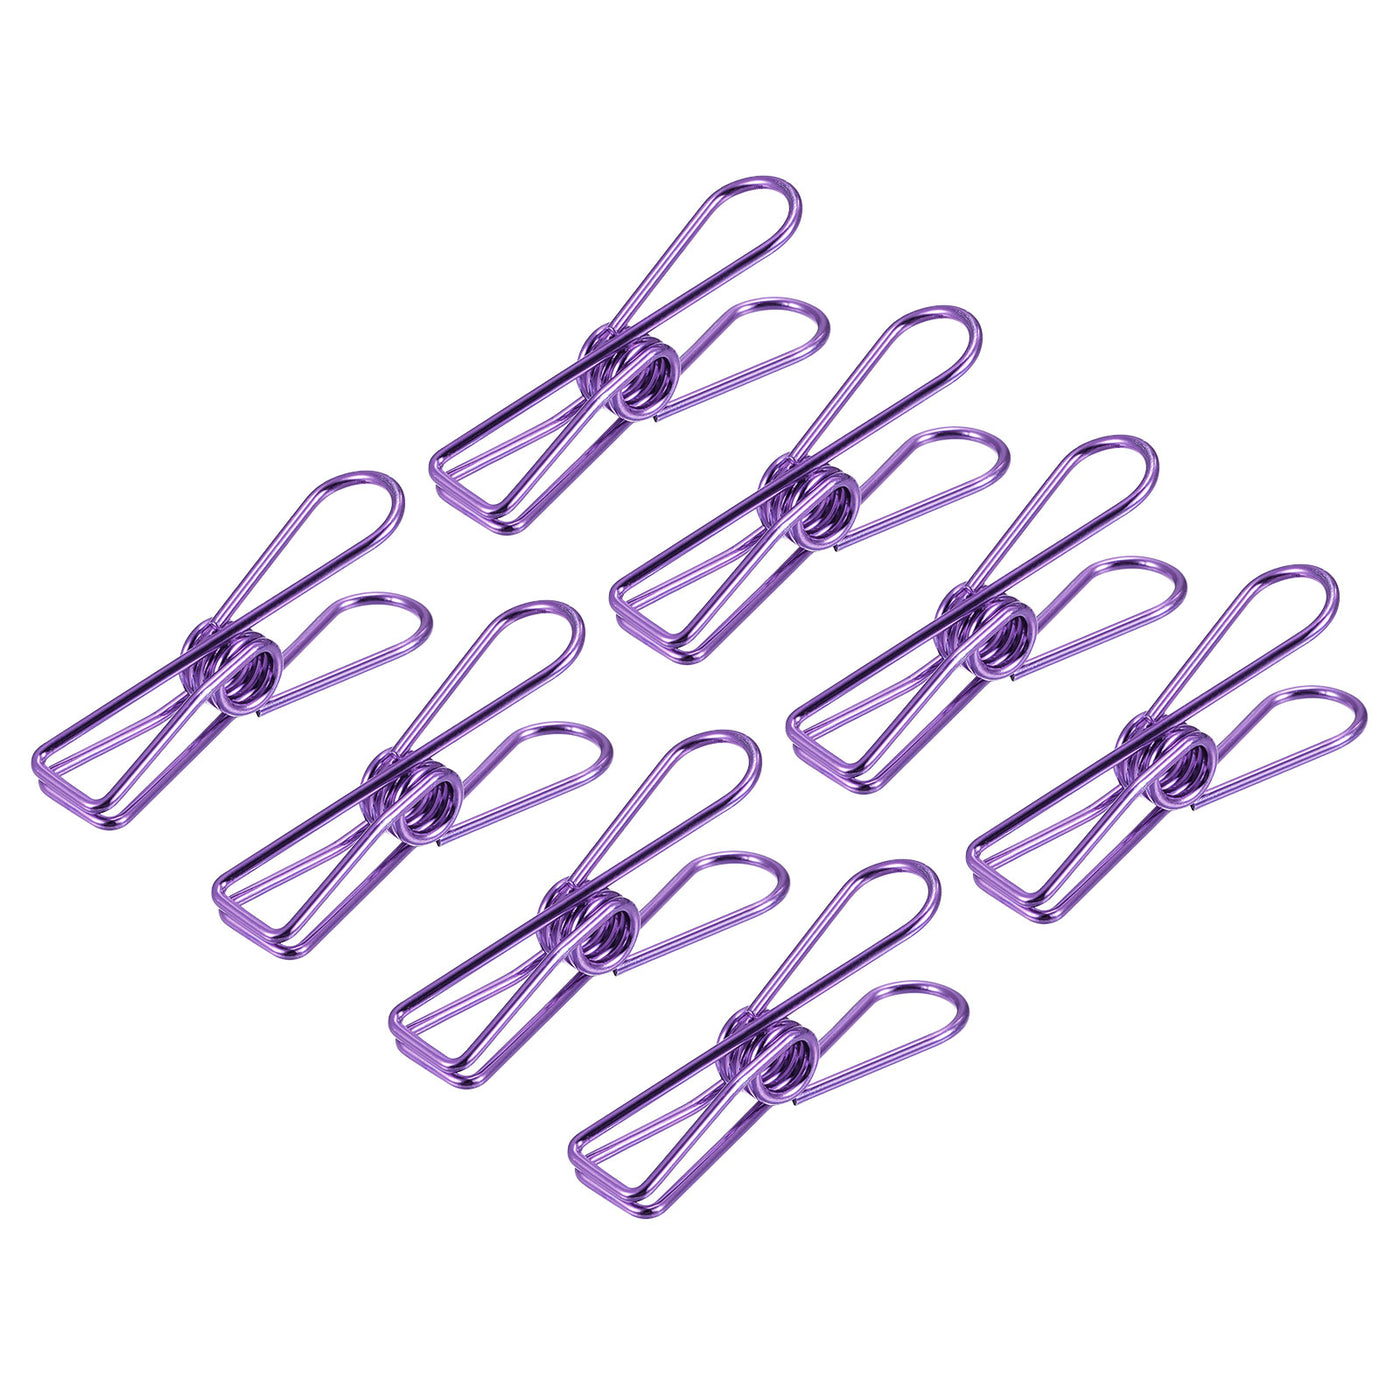 uxcell Uxcell Tablecloth Clips, 32mm Carbon Steel Clamps for Fixing Table Cloth, Purple 8 Pcs